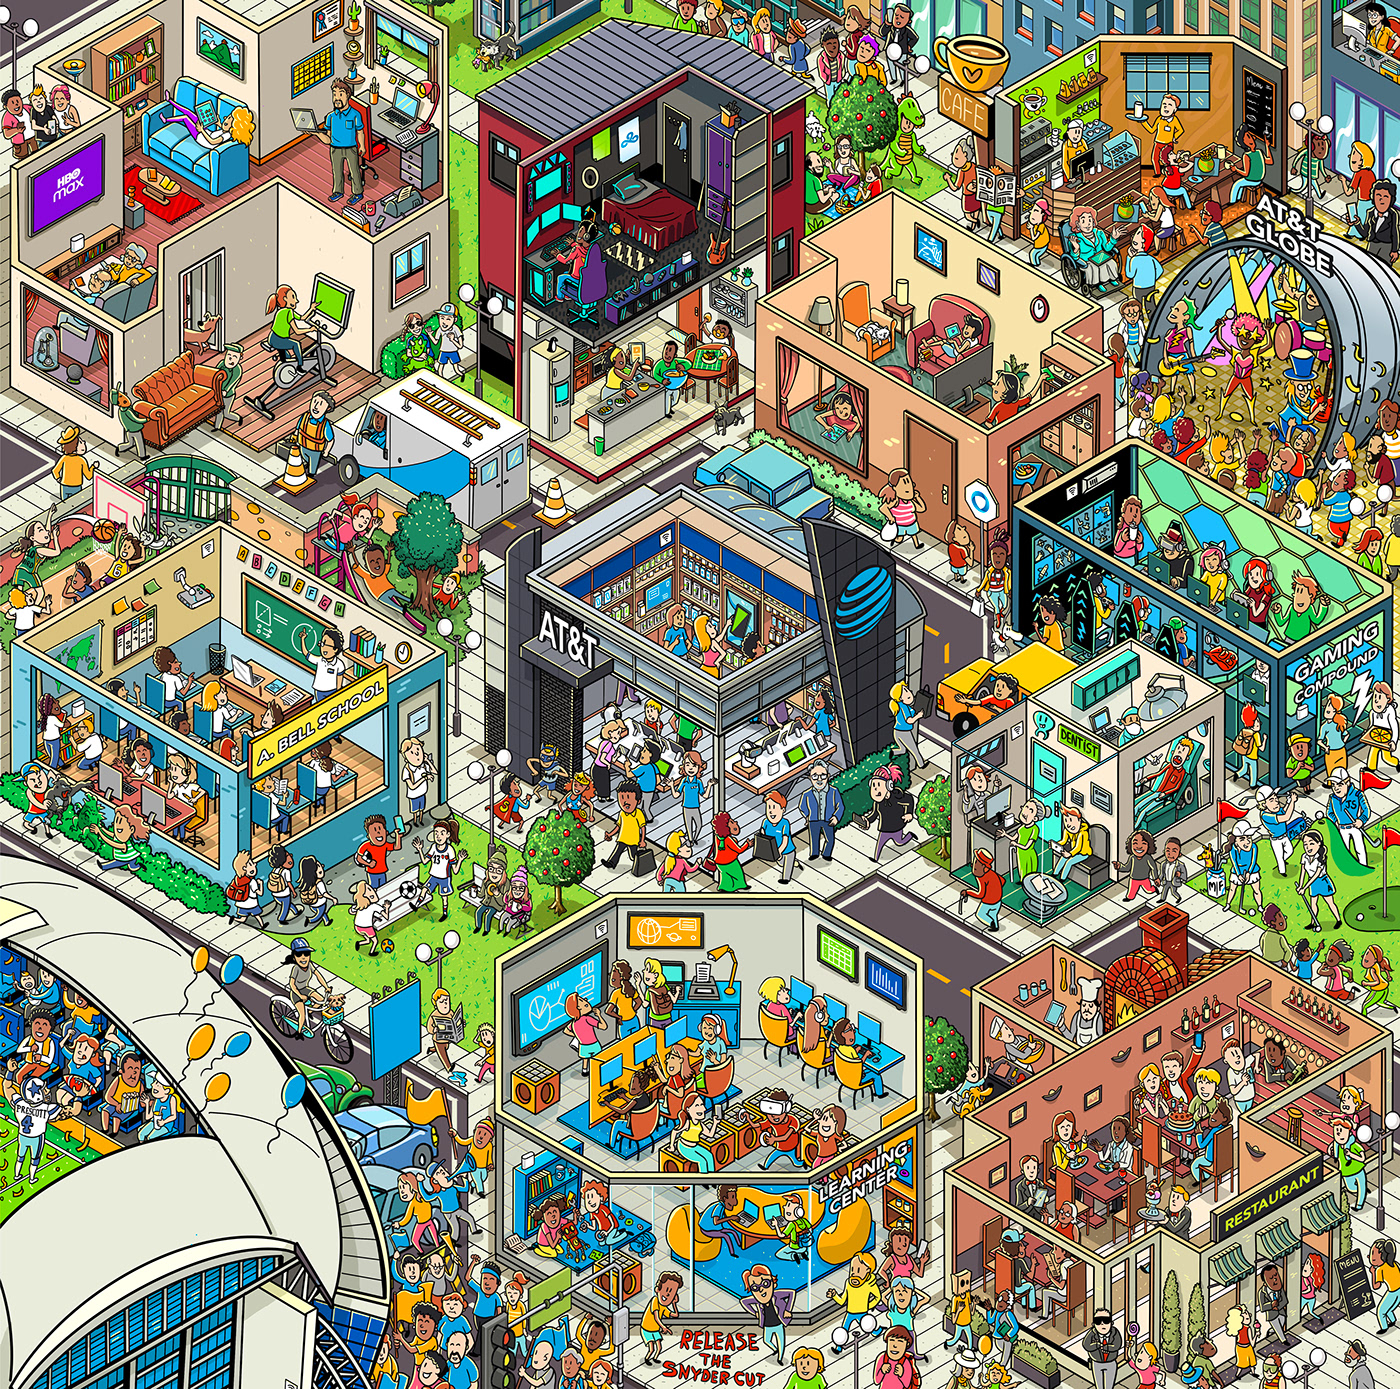 seek-and-find wheres waldo wheres wally Isometric Internet Technology detailed colorful Web search-and-find